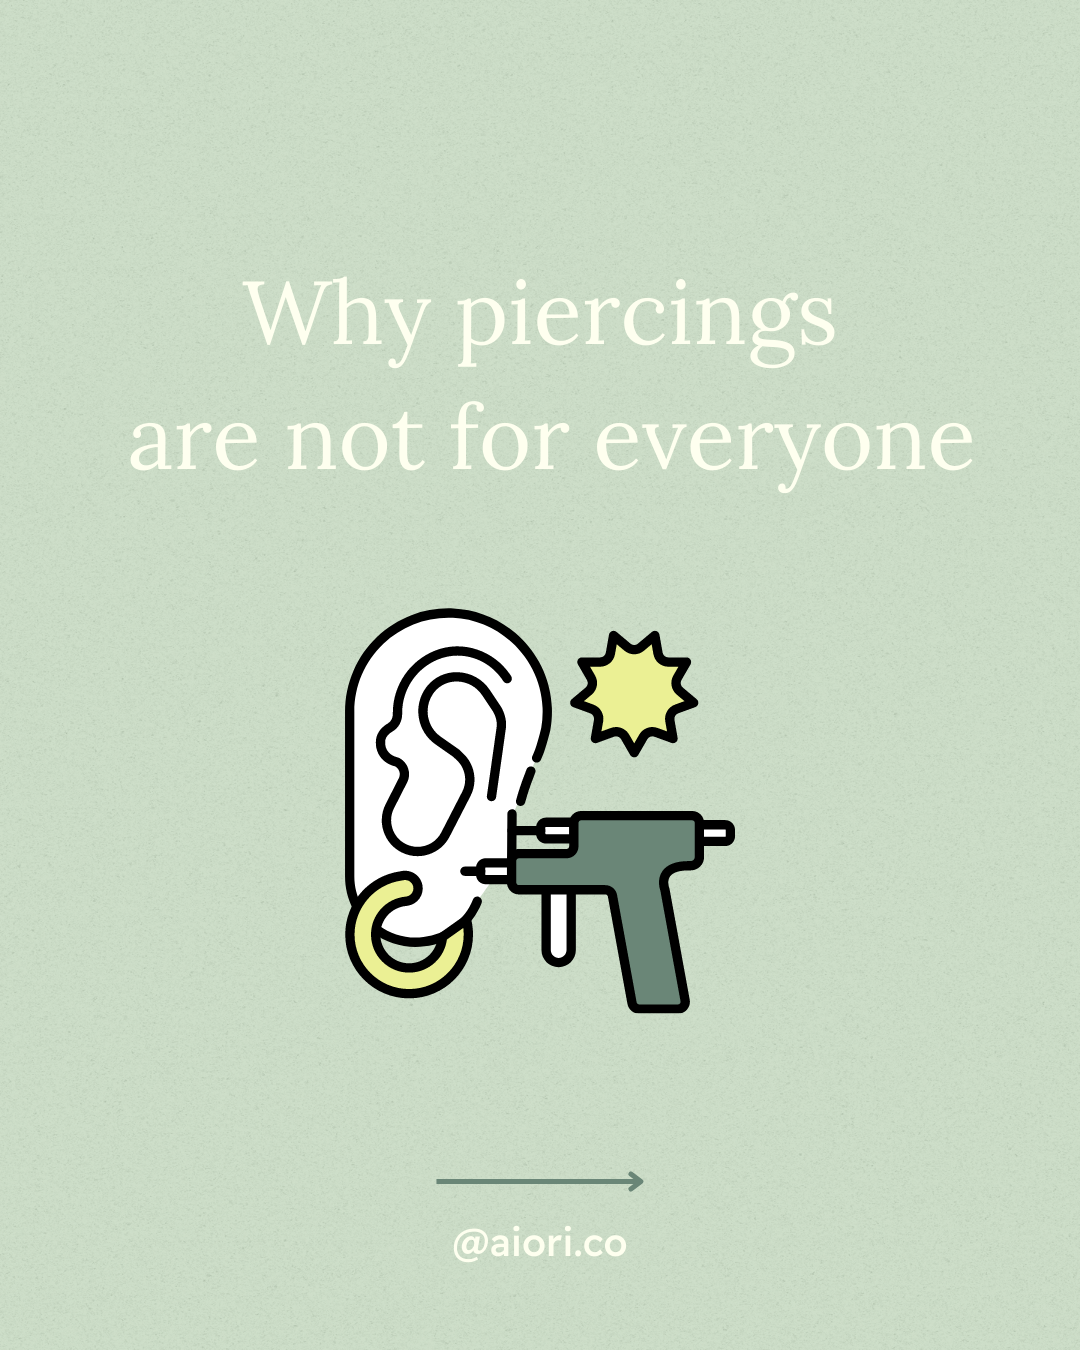 Why piercings are not for everyone